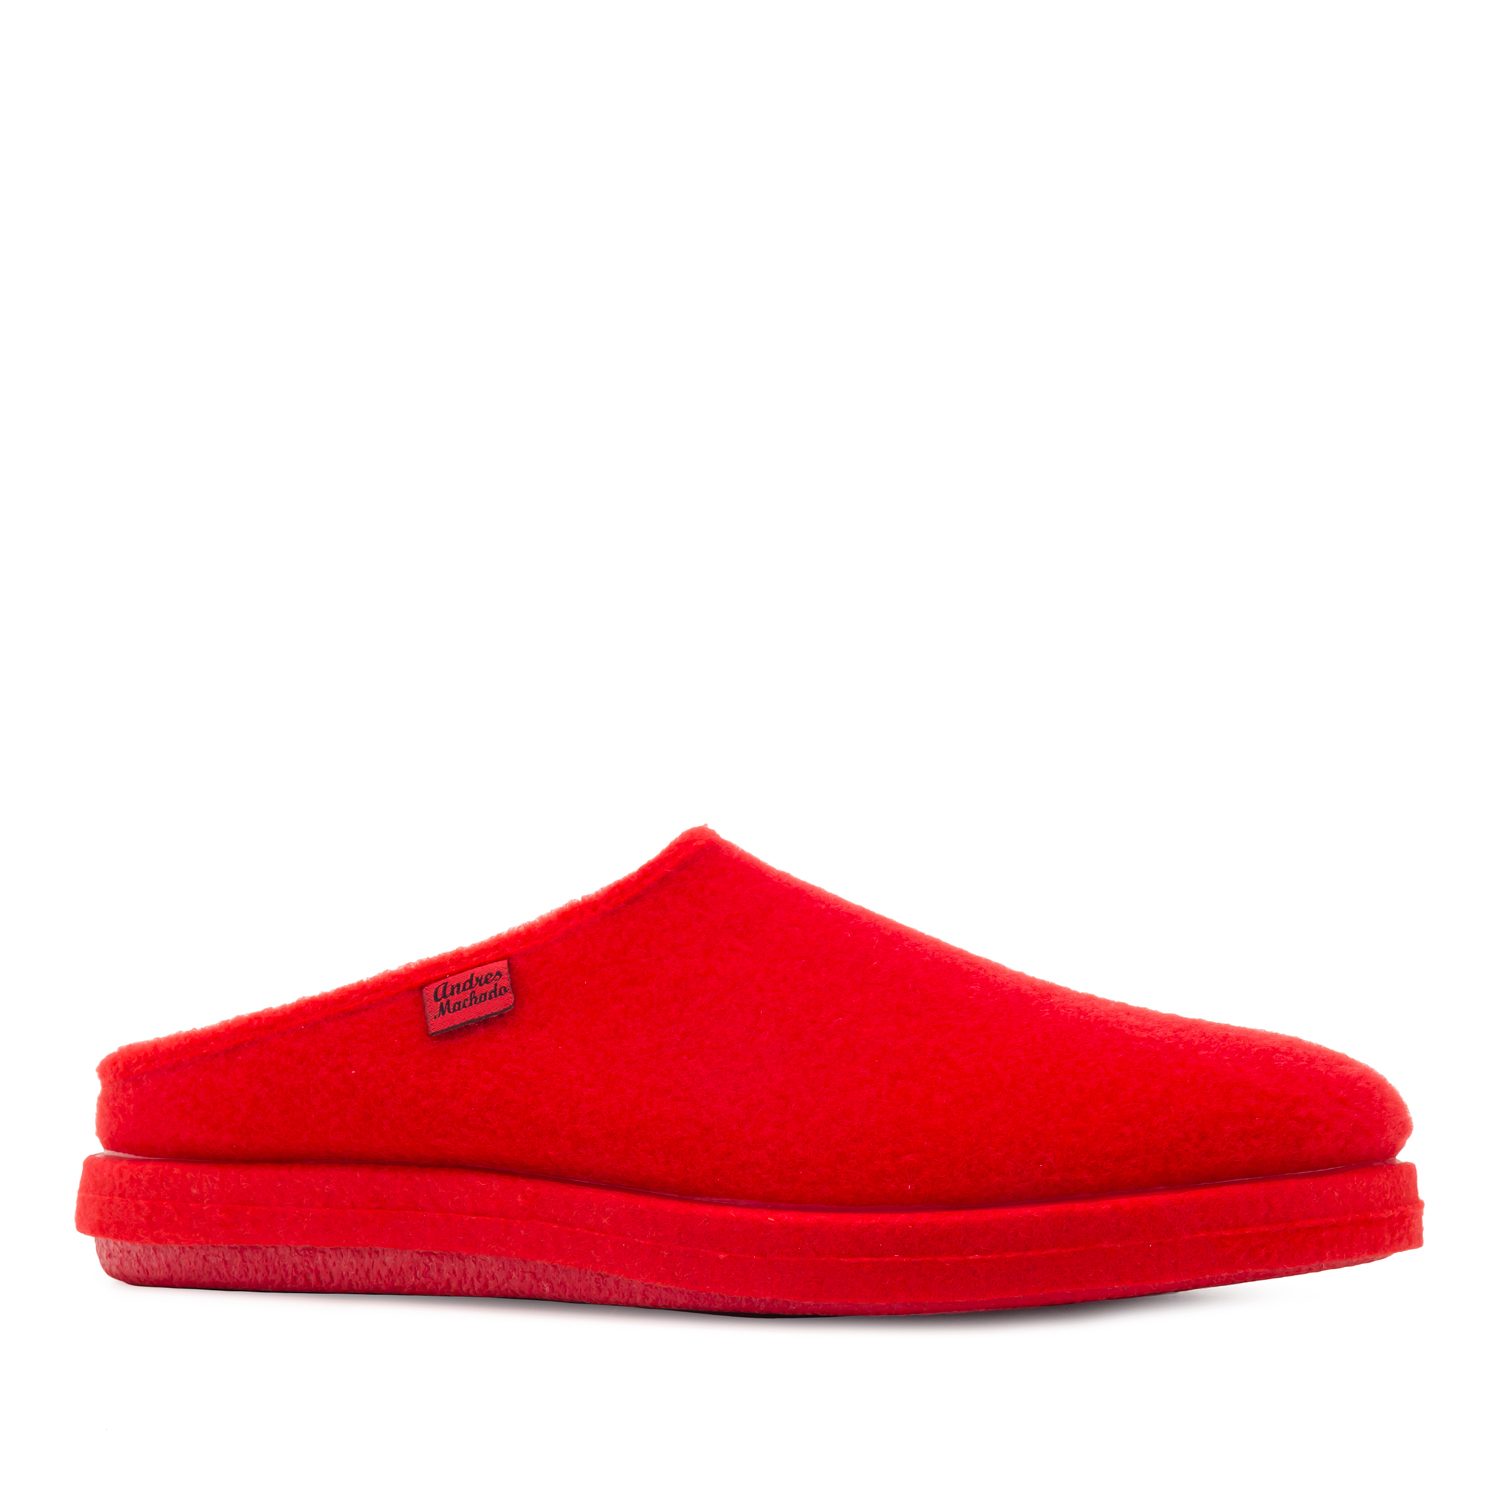 Very comfortable Red Felt Slippers with footbed 